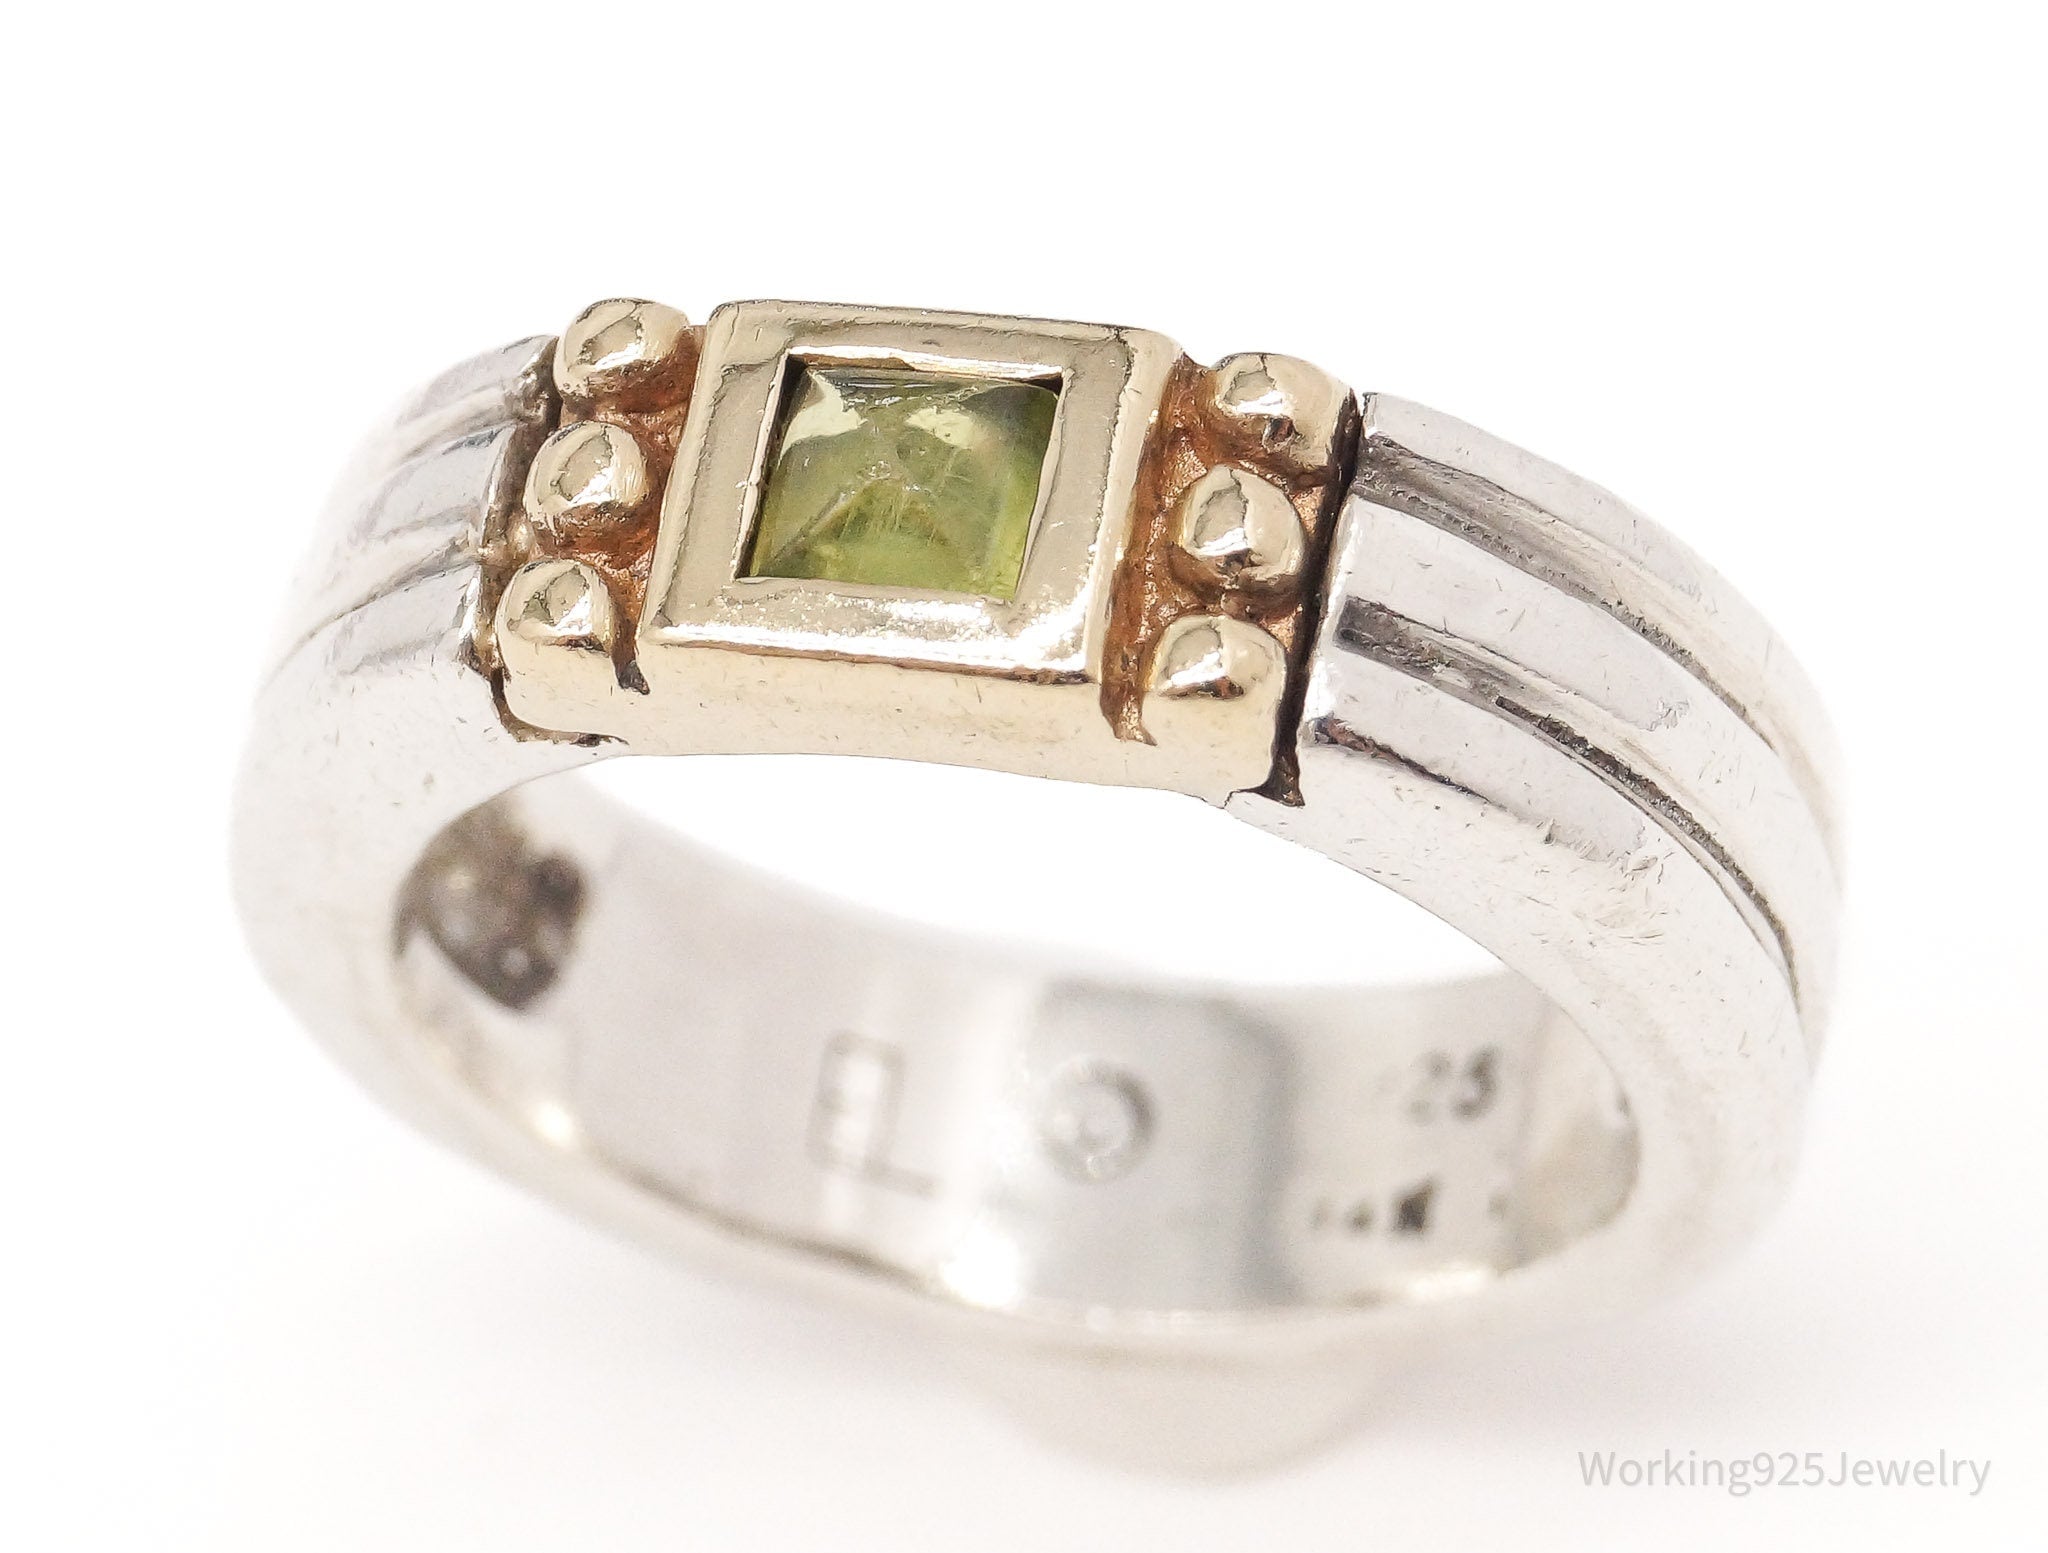 Vintage 14K Yellow Gold Peridot Sterling Silver Ring - Size 7.5